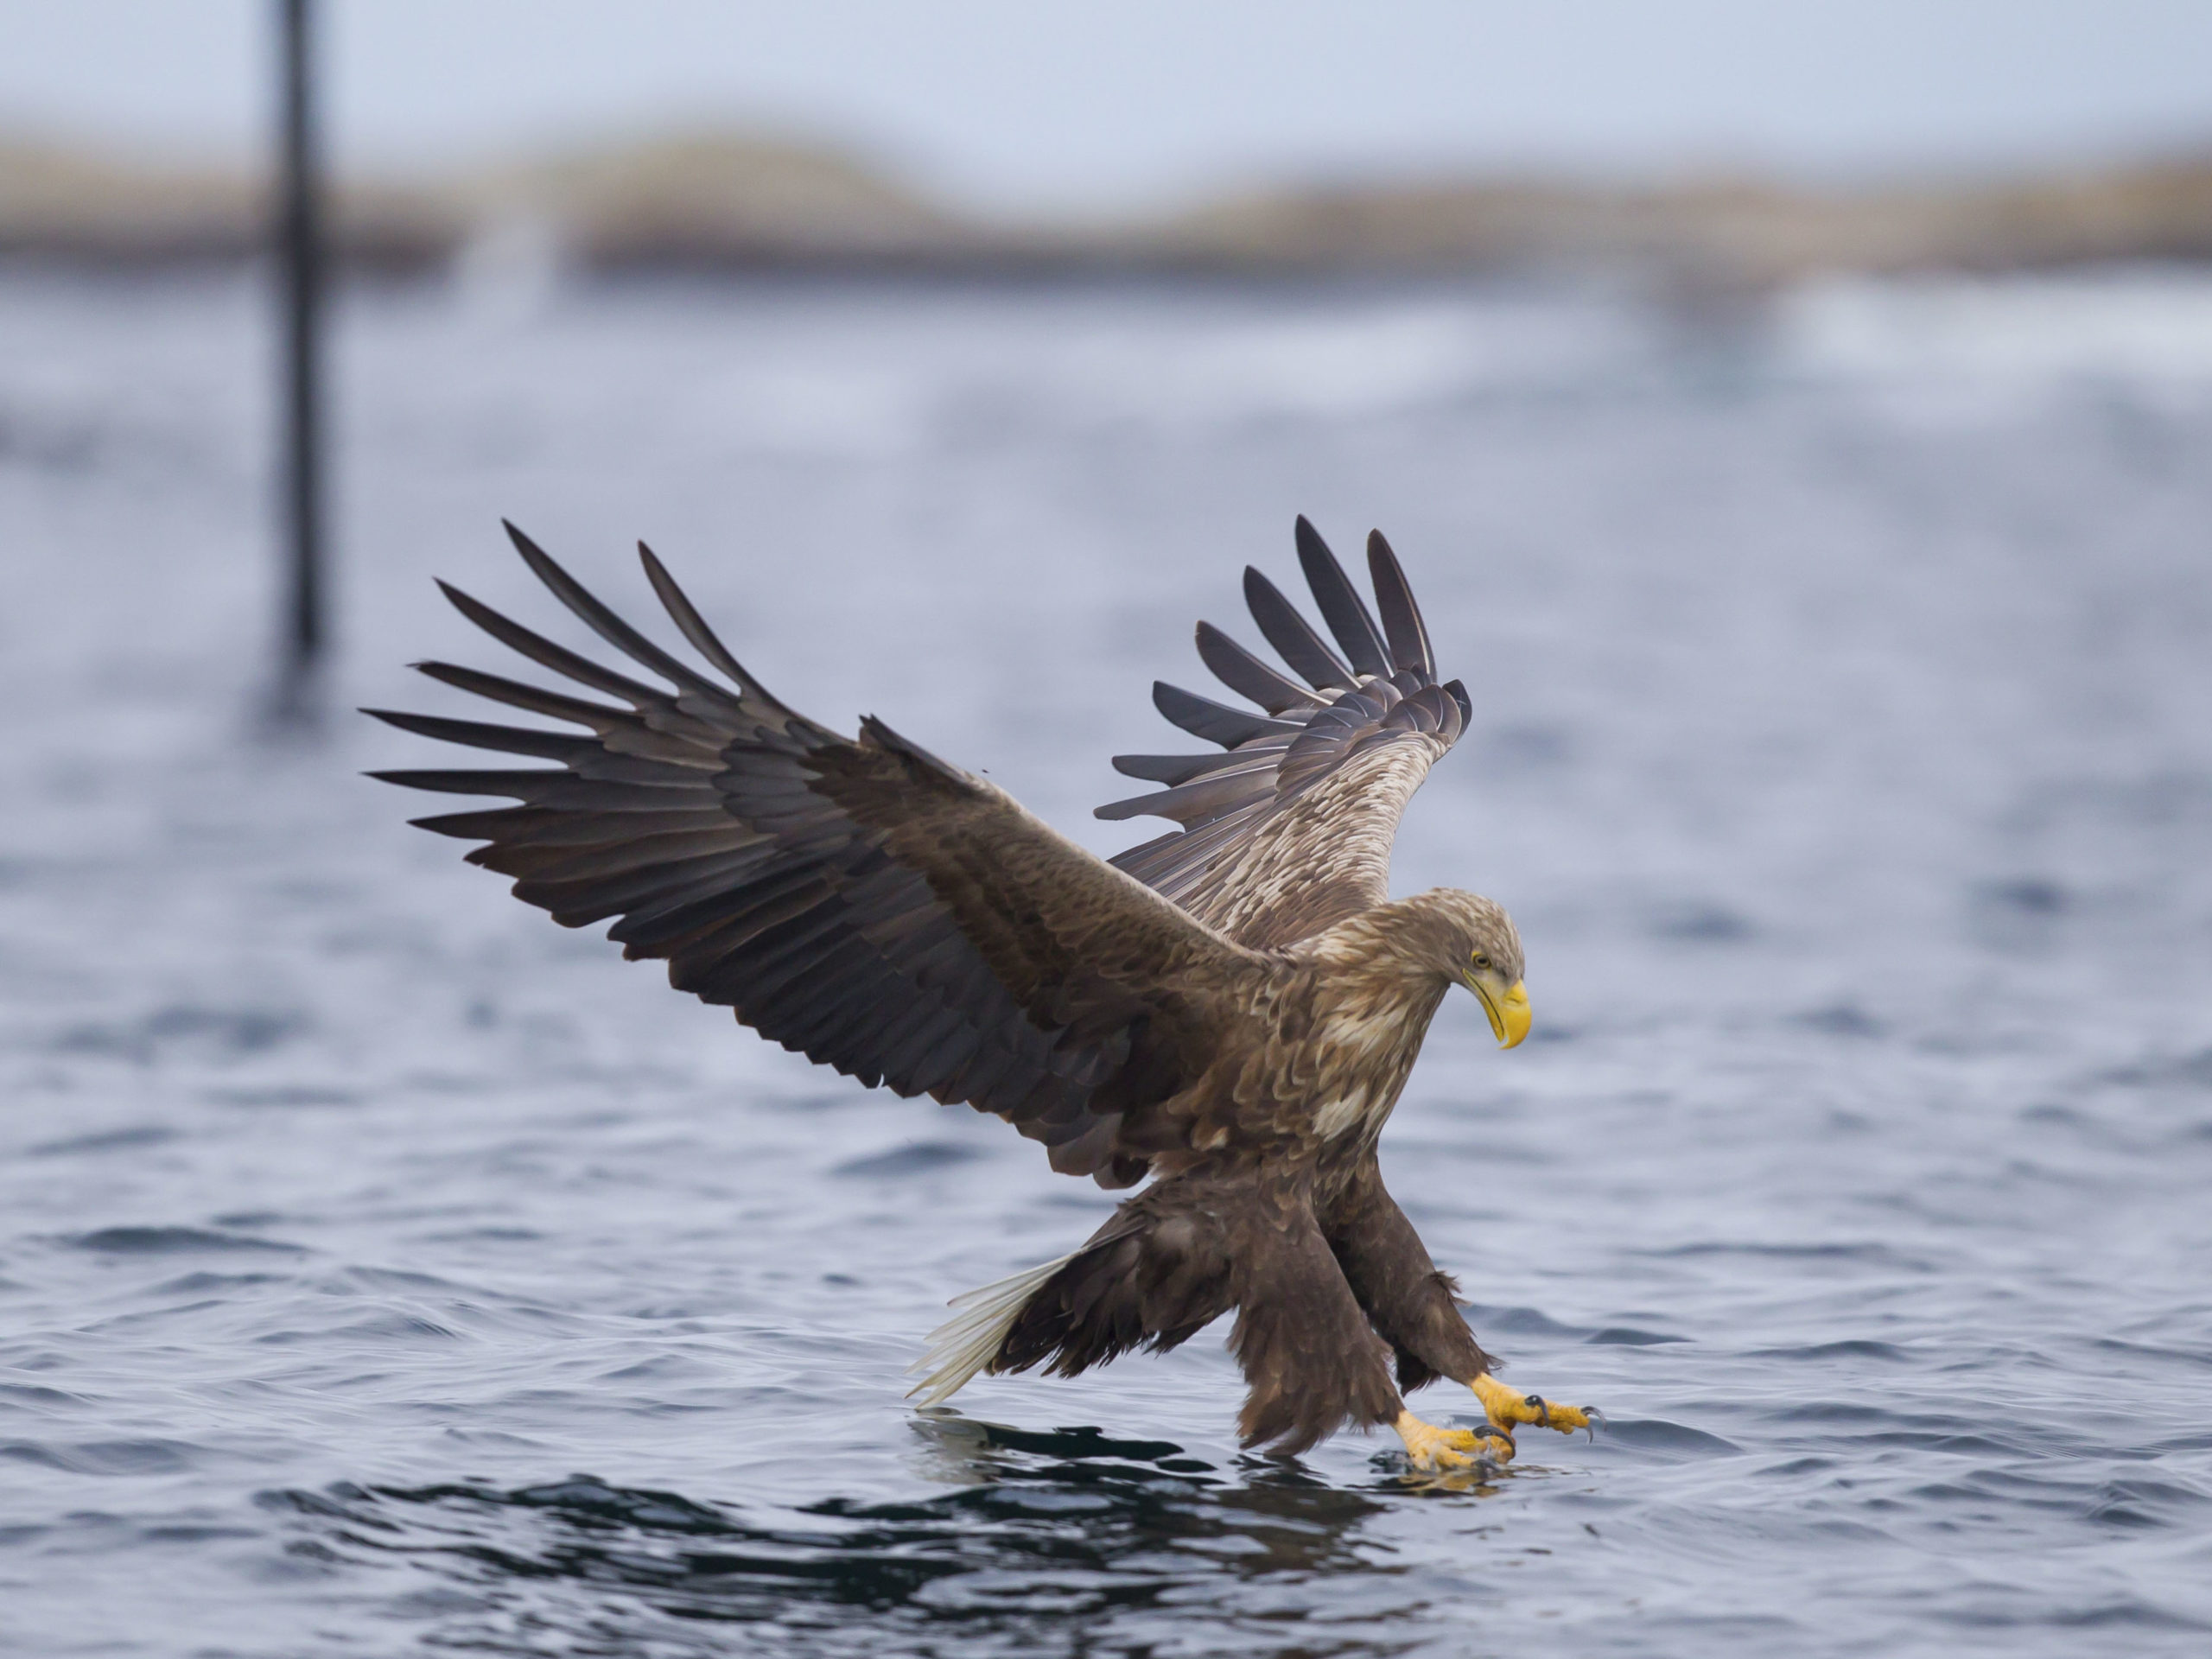 Sea eagles are not uncommon to see